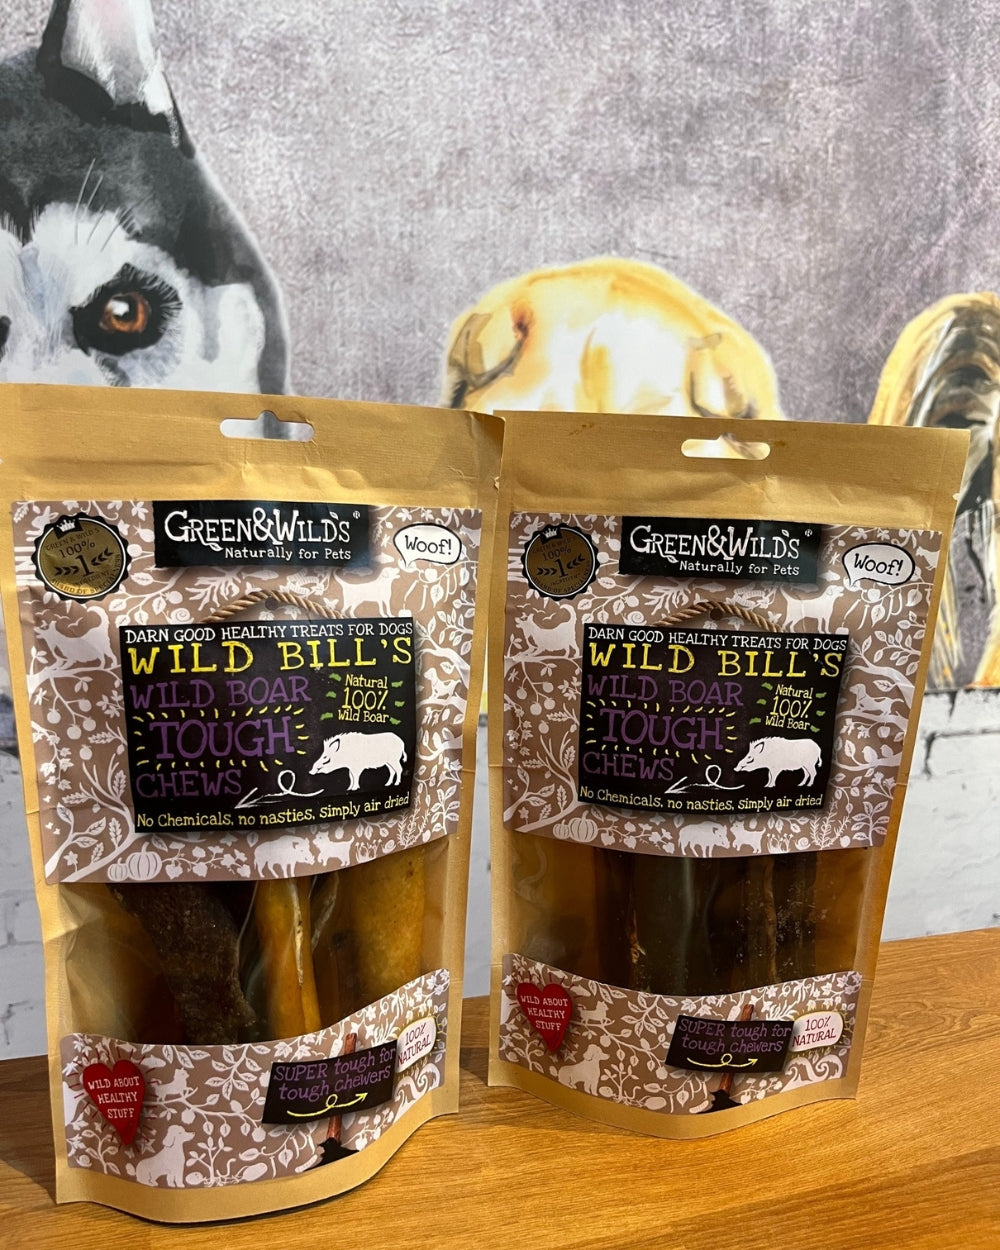 Green and Wilds Wild Boar Natural Dog Treat